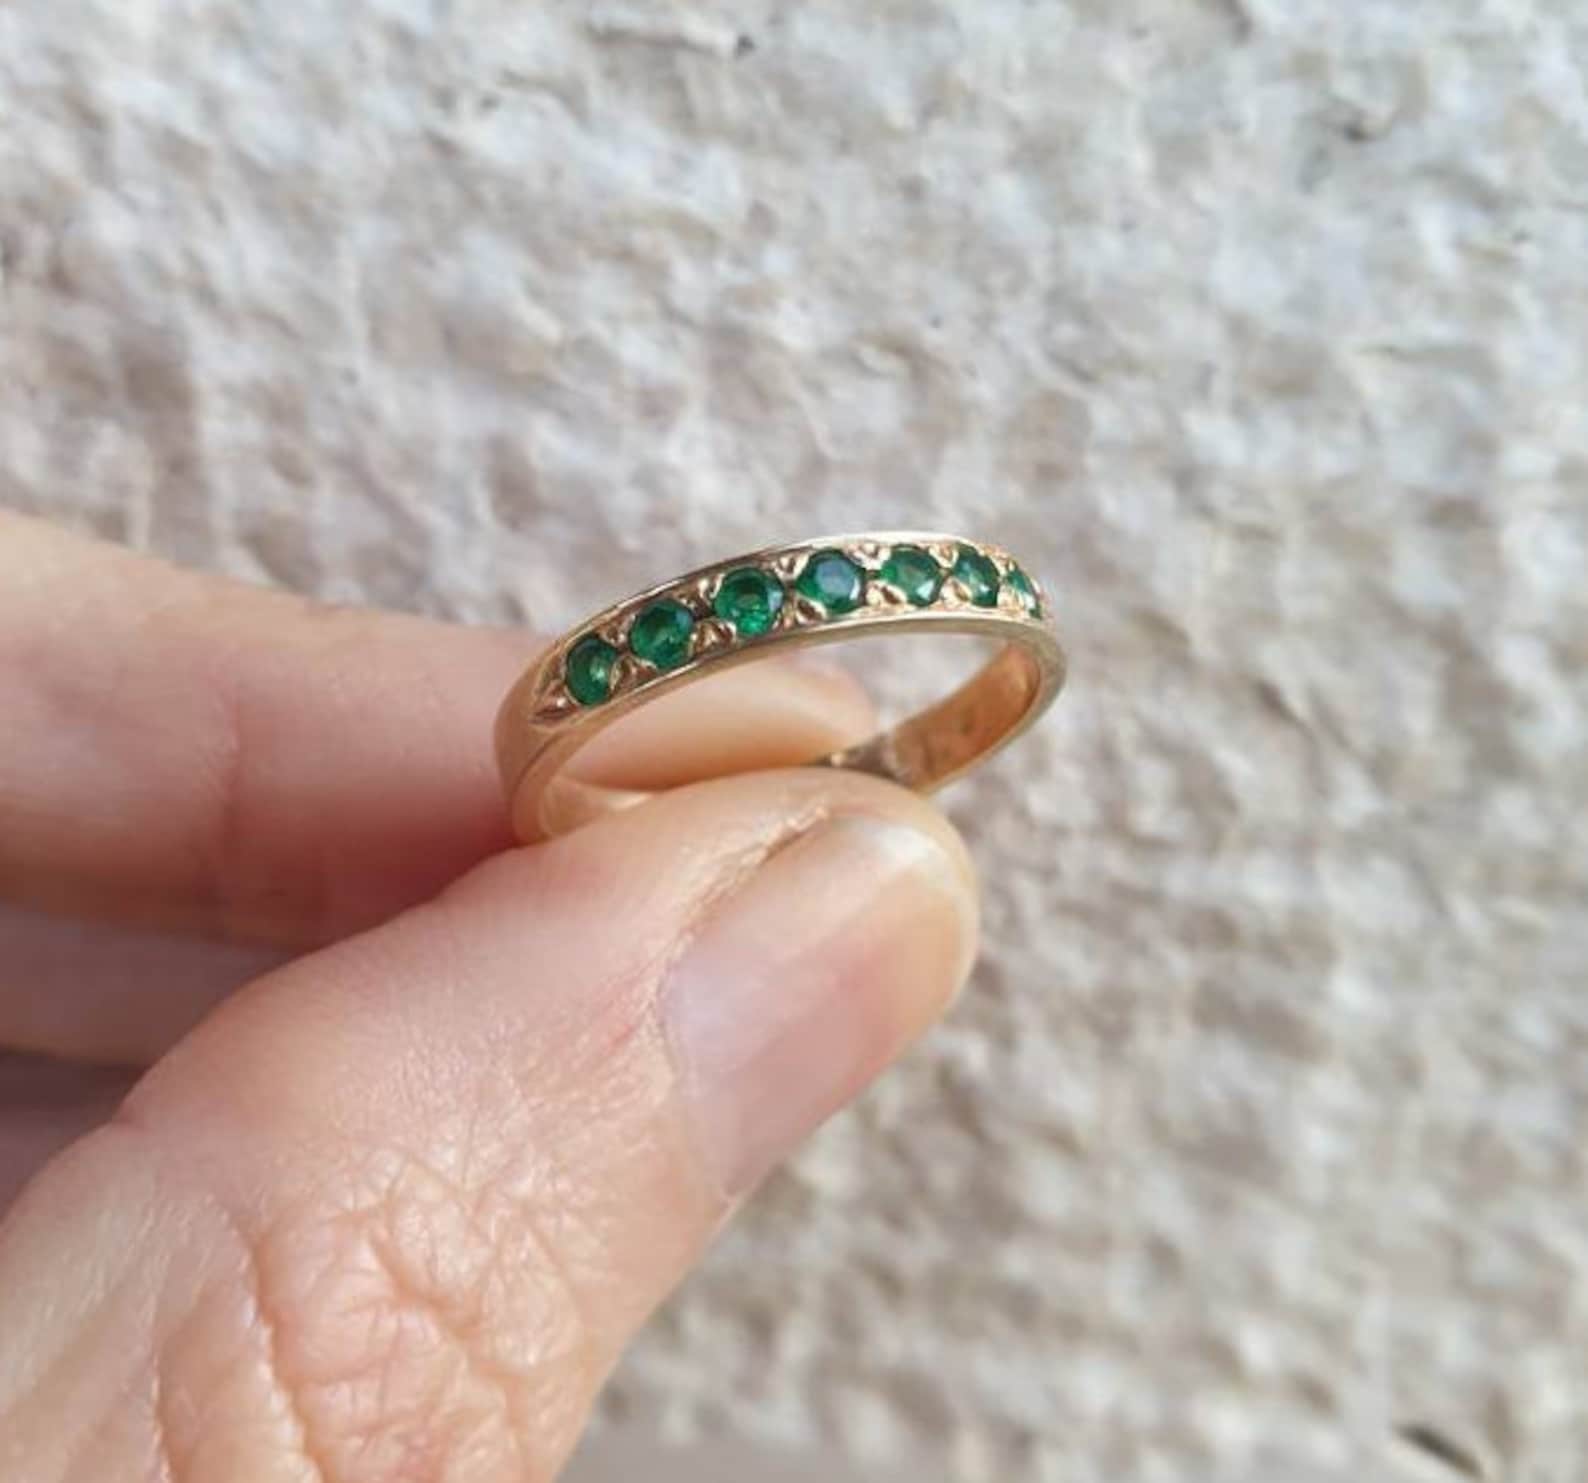 Solid gold ring Gold Emerald ring Green Emerald ring half | Etsy